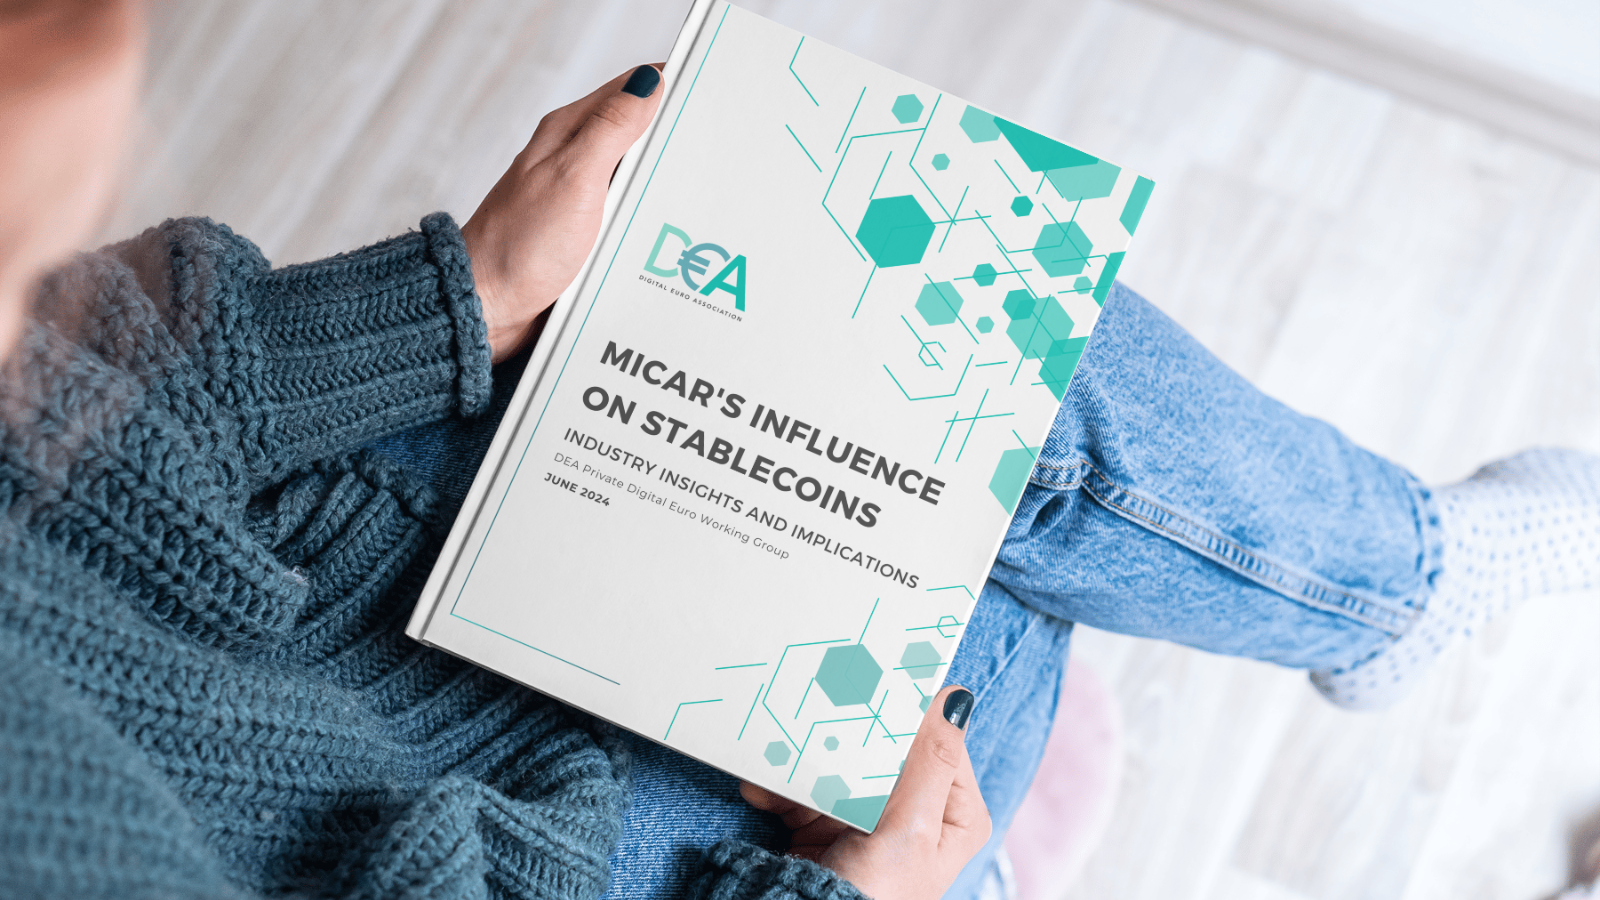 MiCAR's Influence on Stablecoins: Industry Insights and Implications